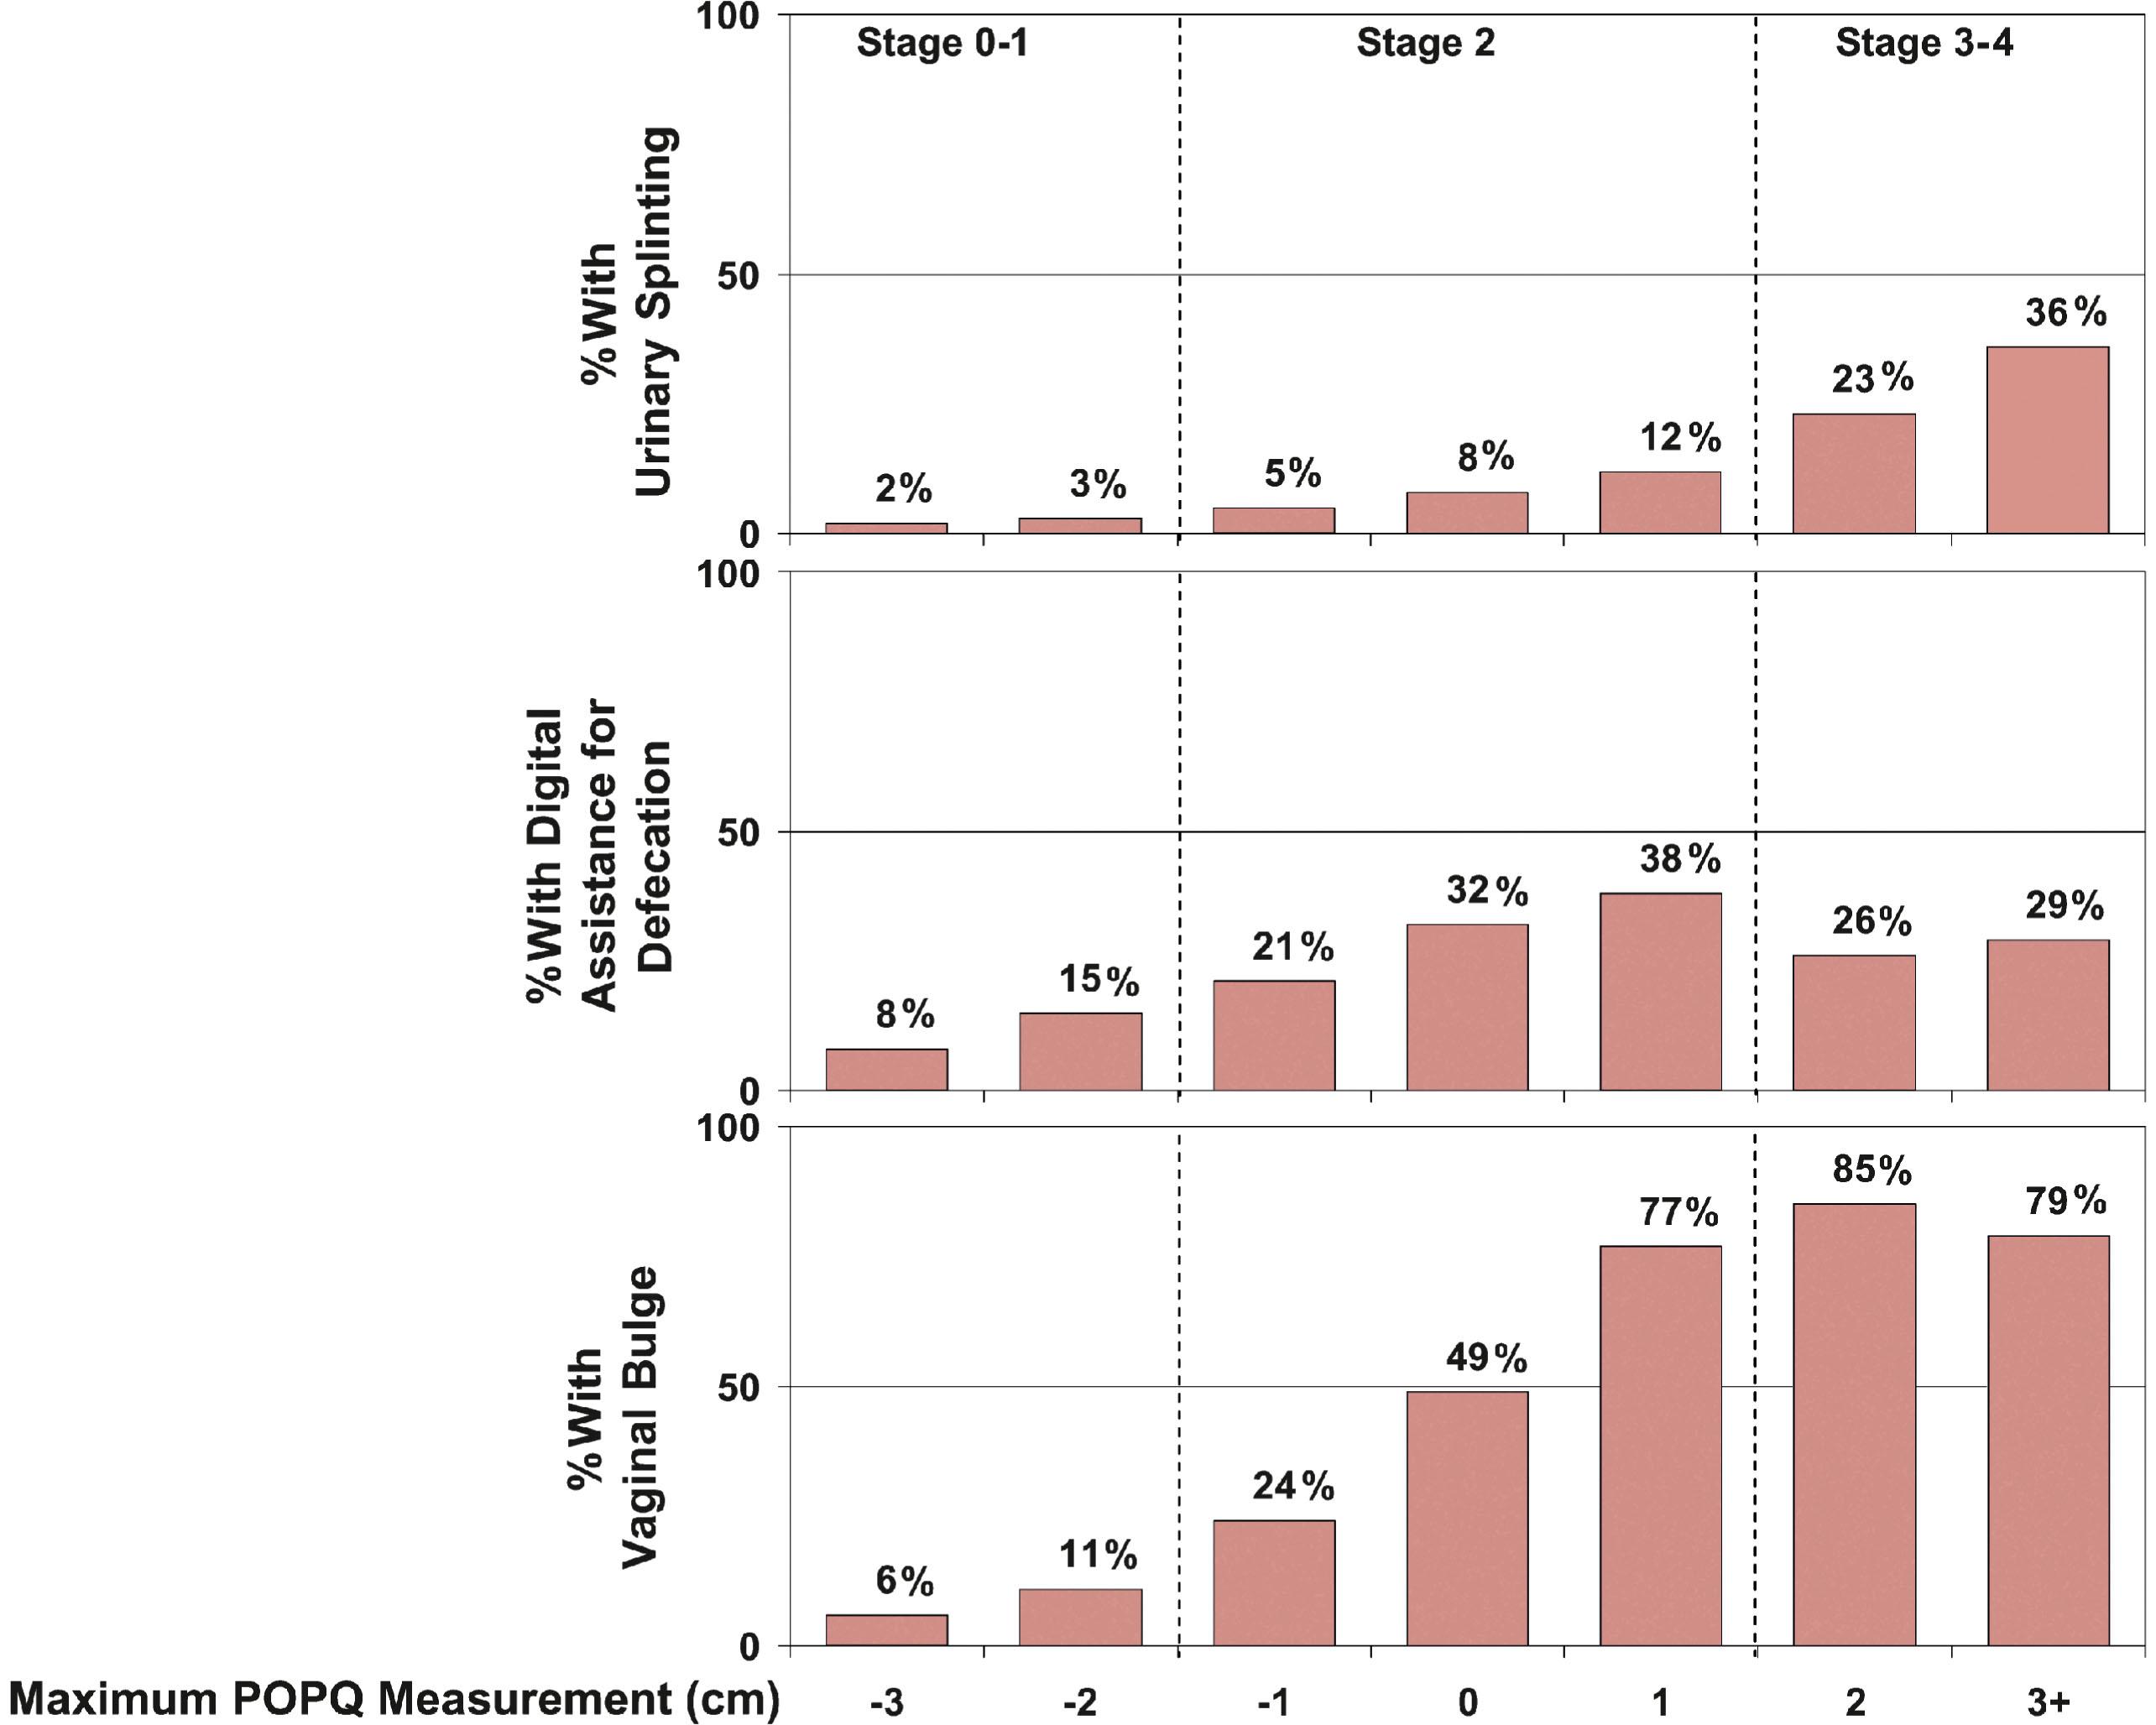 Fig. 20.6, Prevalence of prolapse symptoms per the pelvic organ prolapse quantification (POPQ) system. The percentage of patients who report urinary splinting, digital assistance, and vaginal bulge is demonstrated for each relevant POPQ measurement.